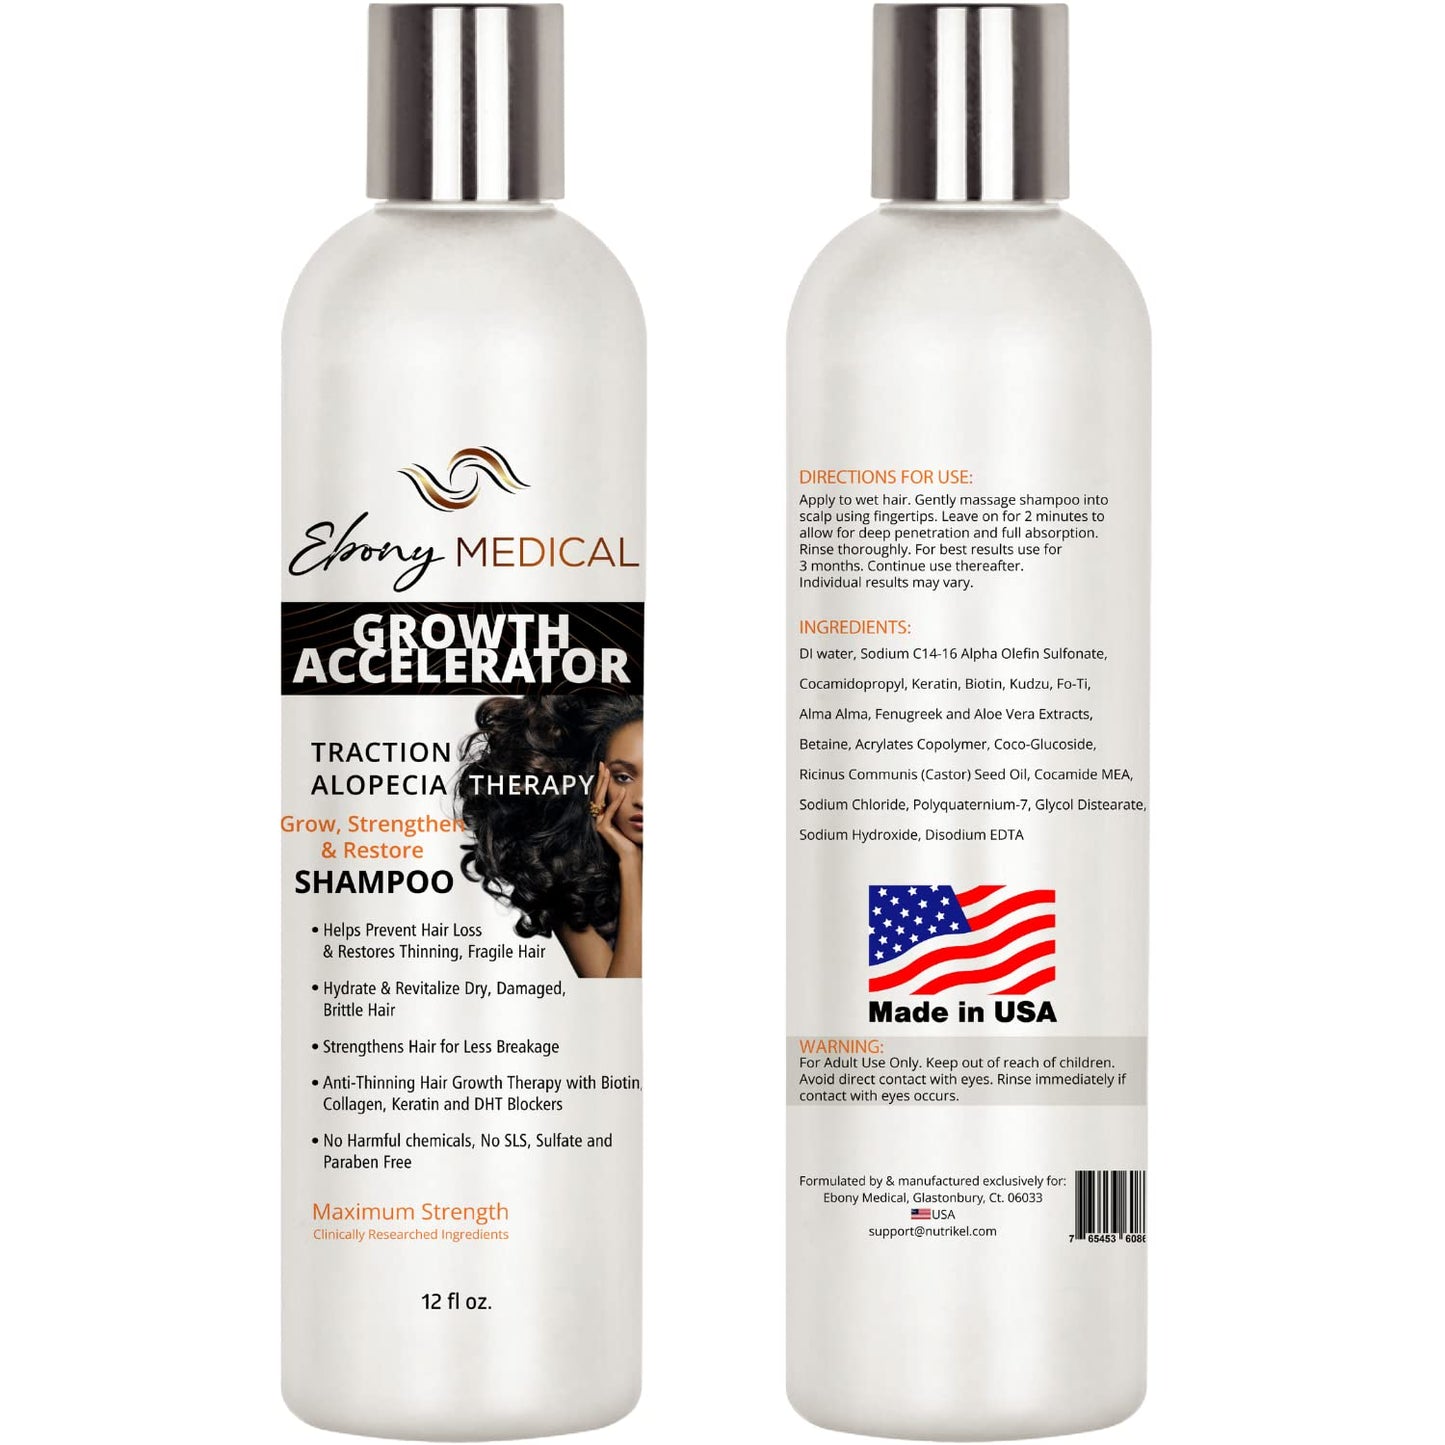 Alopecia Areata Treatment Hair Loss Shampoo - Amazing Hair Growth Product Helps with Thinning Hair, Alopecia Treatment & Receding Hairlines